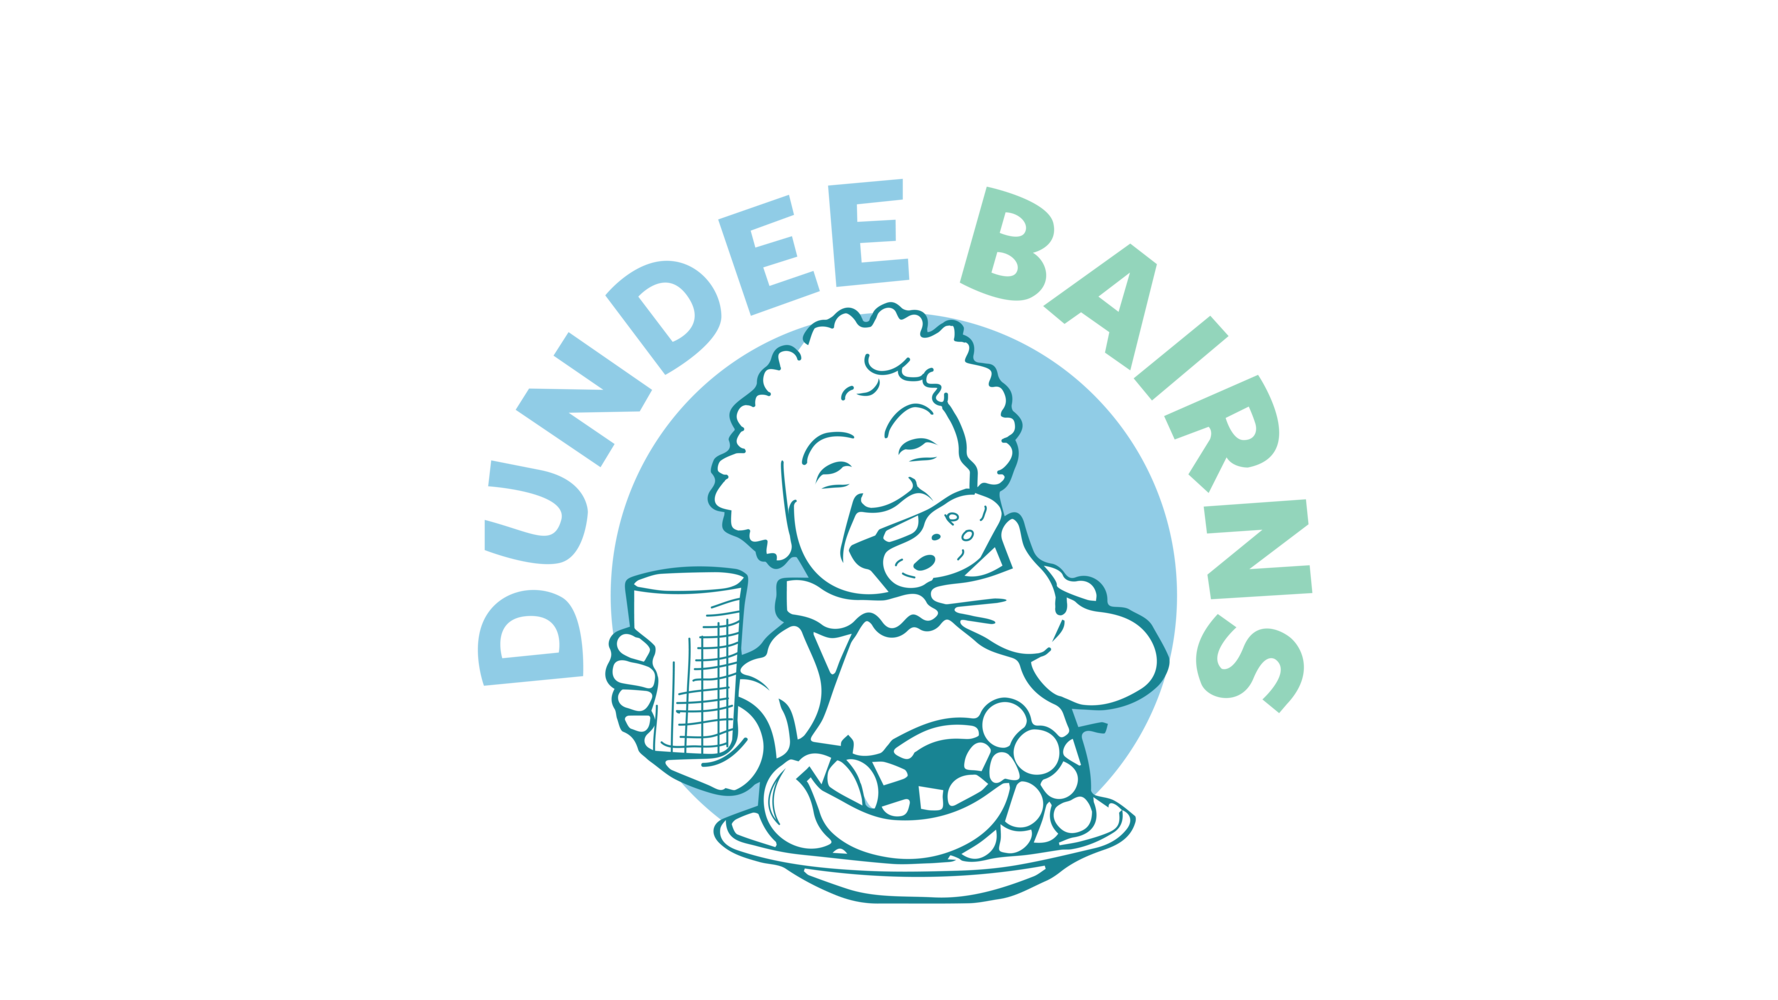 DUNDEE BAIRNS - Free meals and clothes to Dundee's bairns